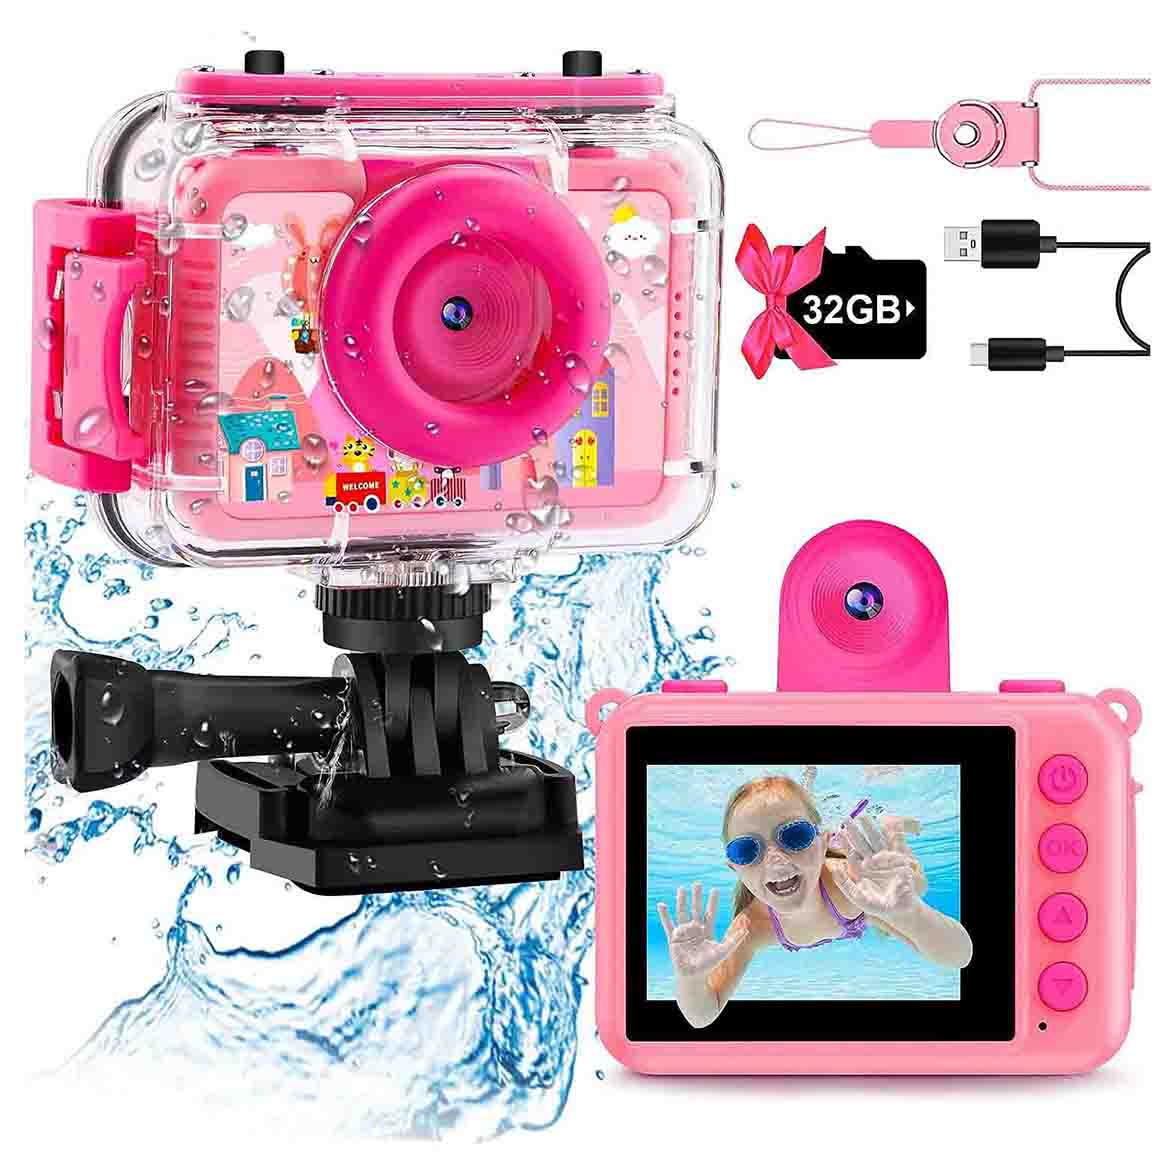 Pink camera on mount with accessories including SD card